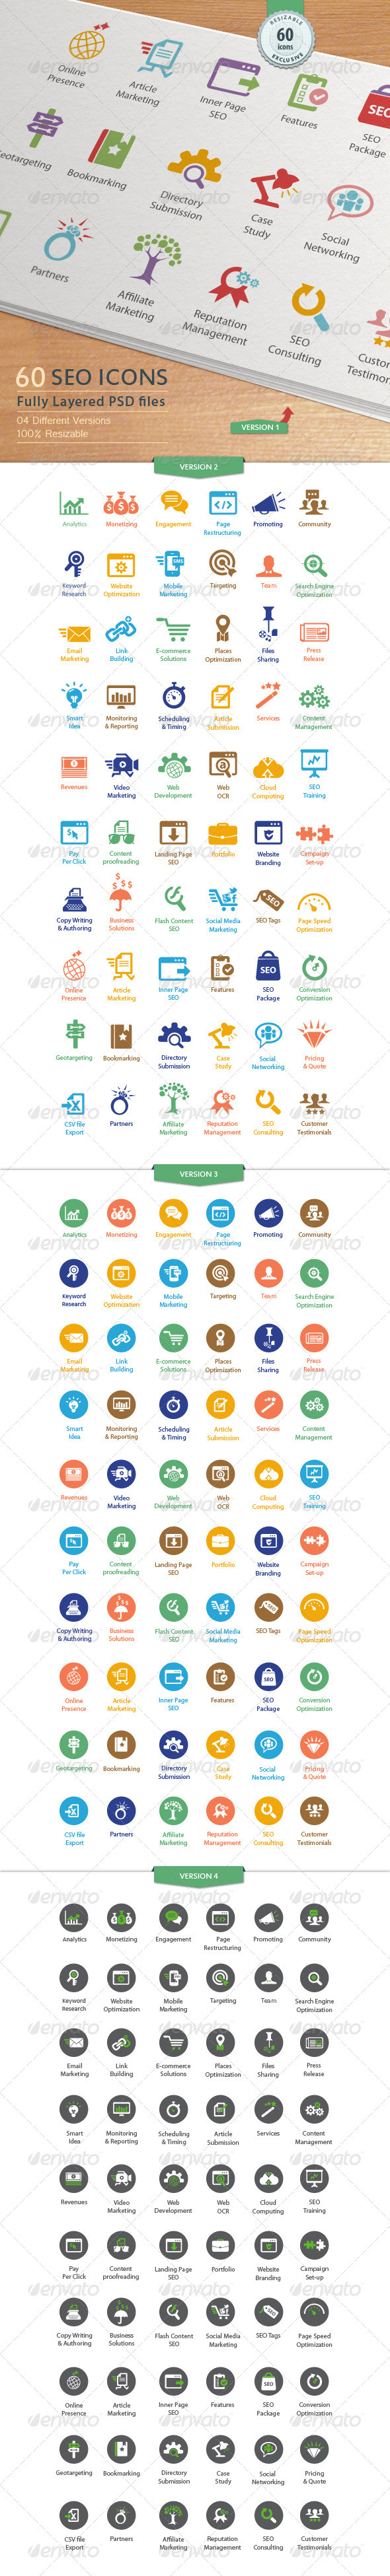 SEO Services Icons - GraphicRiver Item for Sale